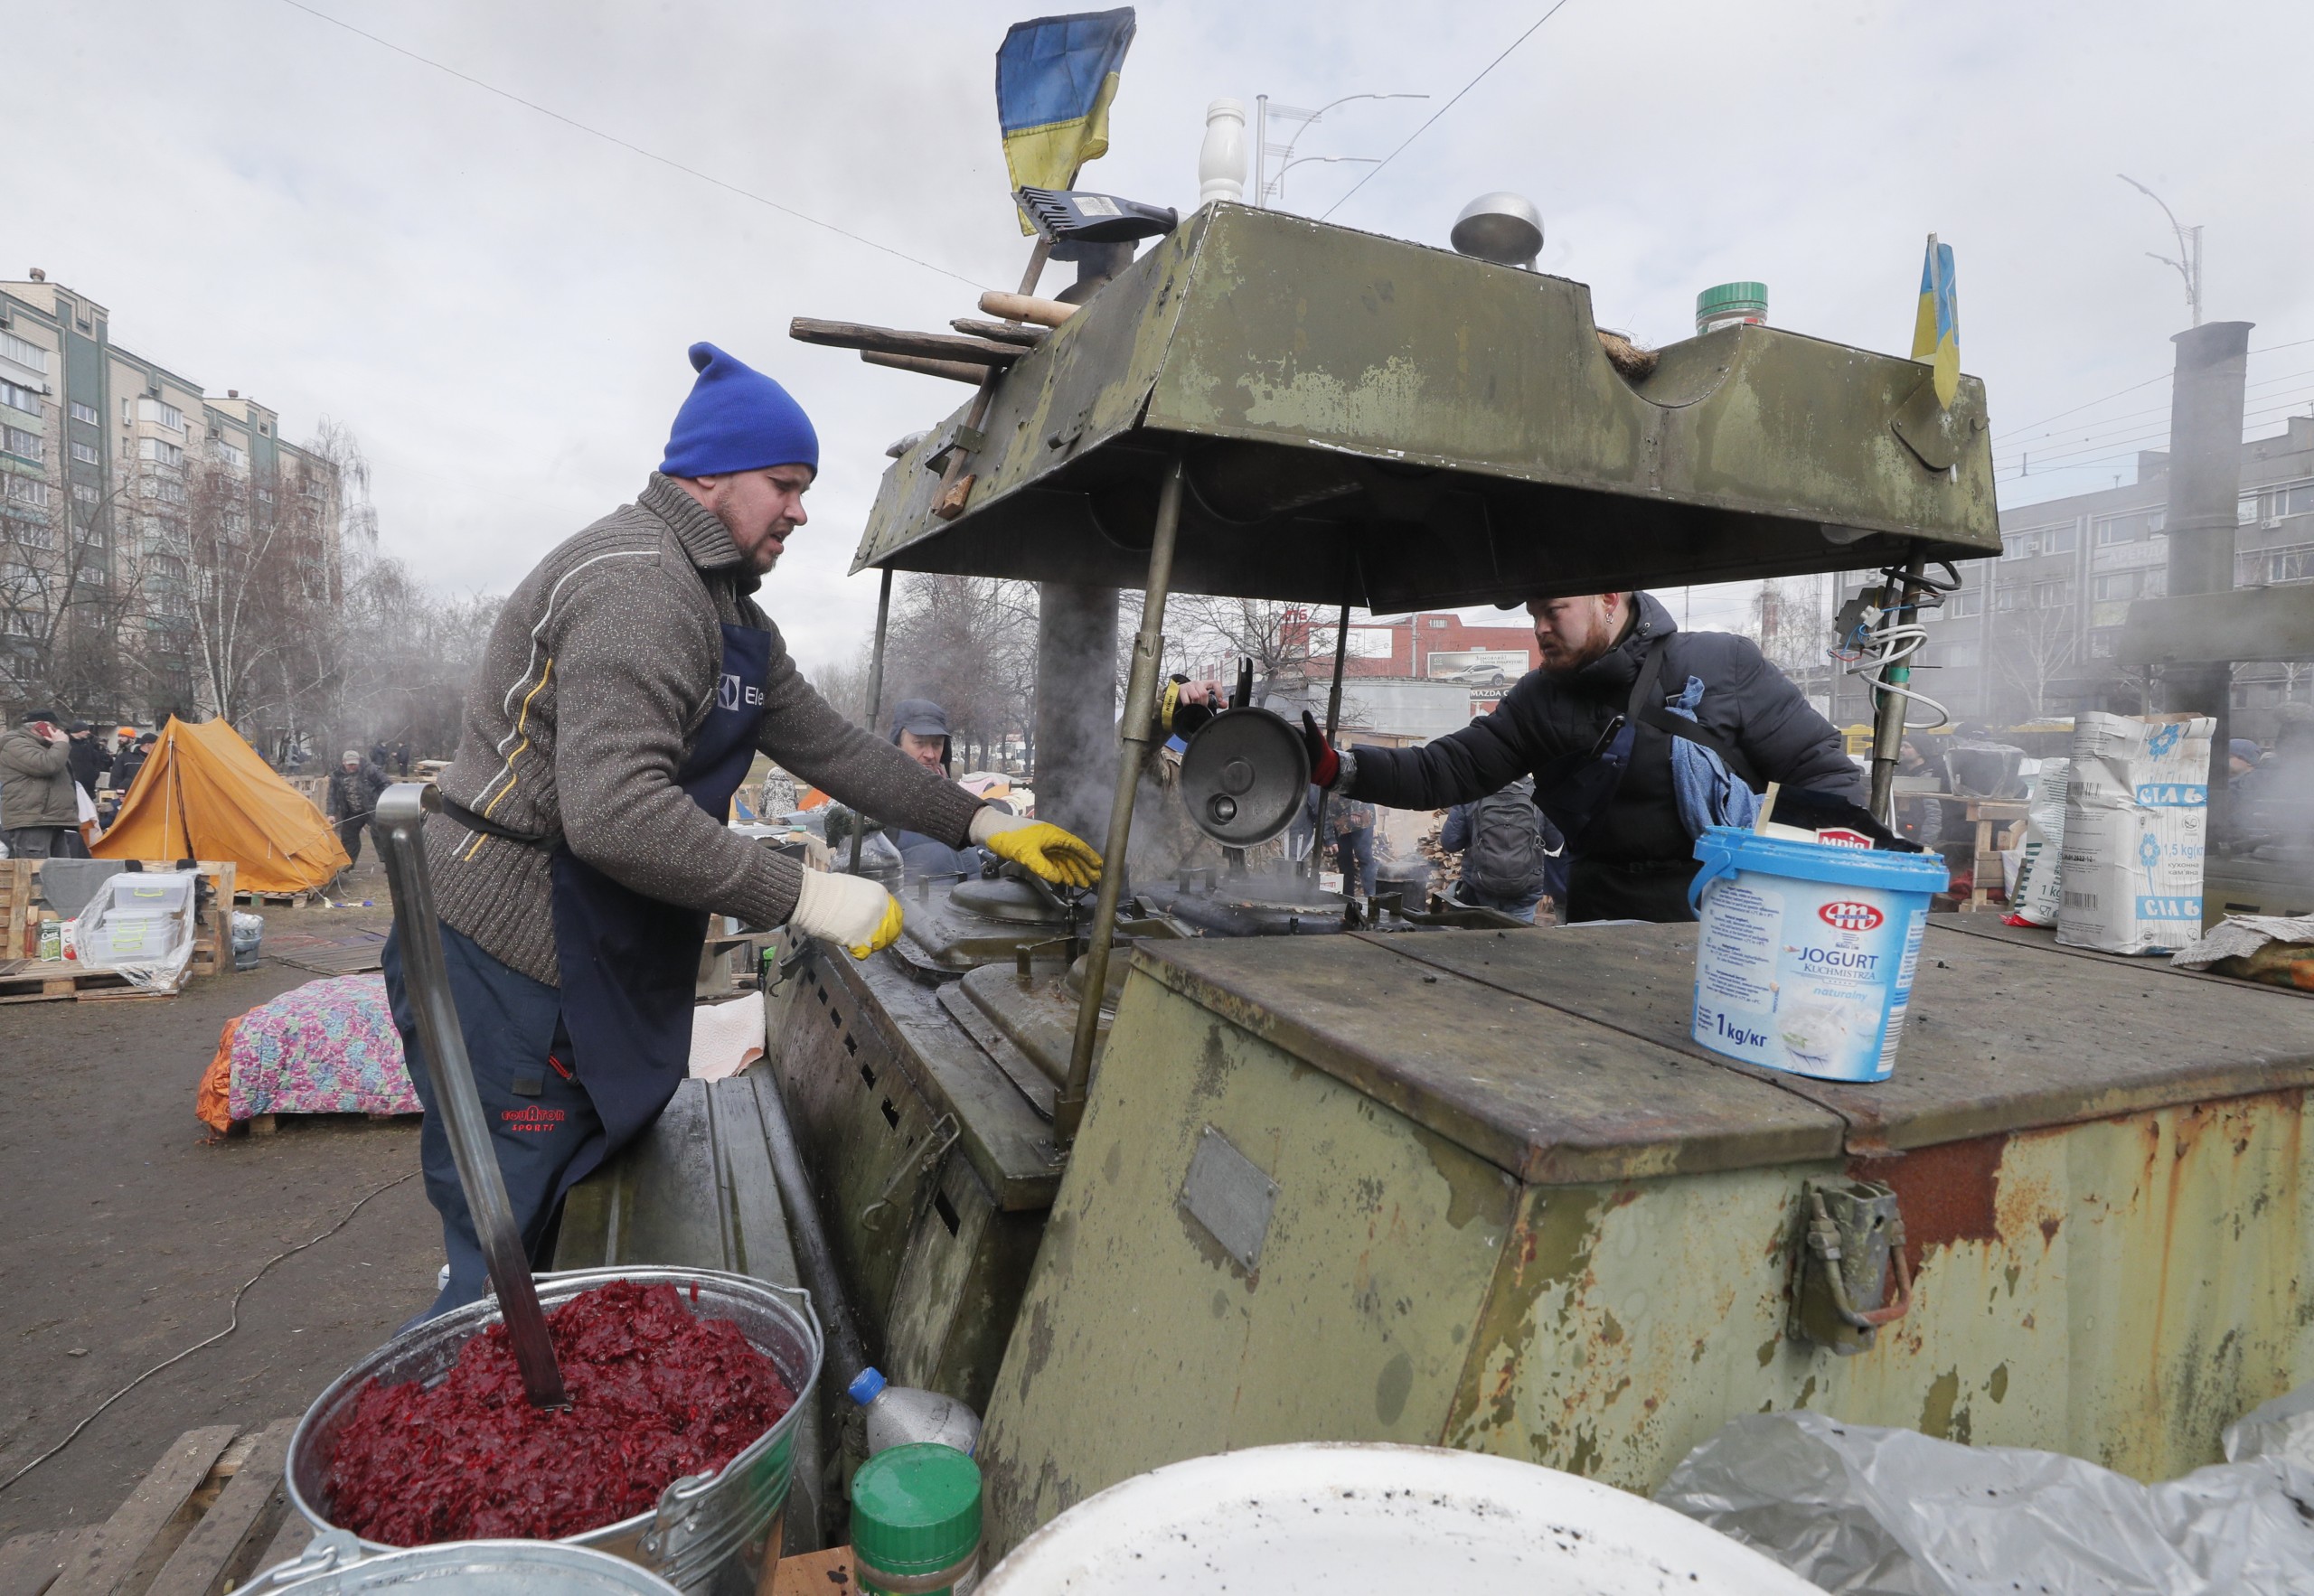 epa09805954 Ukrainians cook food for territorial defense members in their camp near one of blockposts in Kyiv (Kiev), Ukraine, 06 March 2022. Russian troops entered Ukraine on 24 February leading to a massive exodus of Ukrainians to neighboring countries as well as internal displacements.  EPA/SERGEY DOLZHENKO